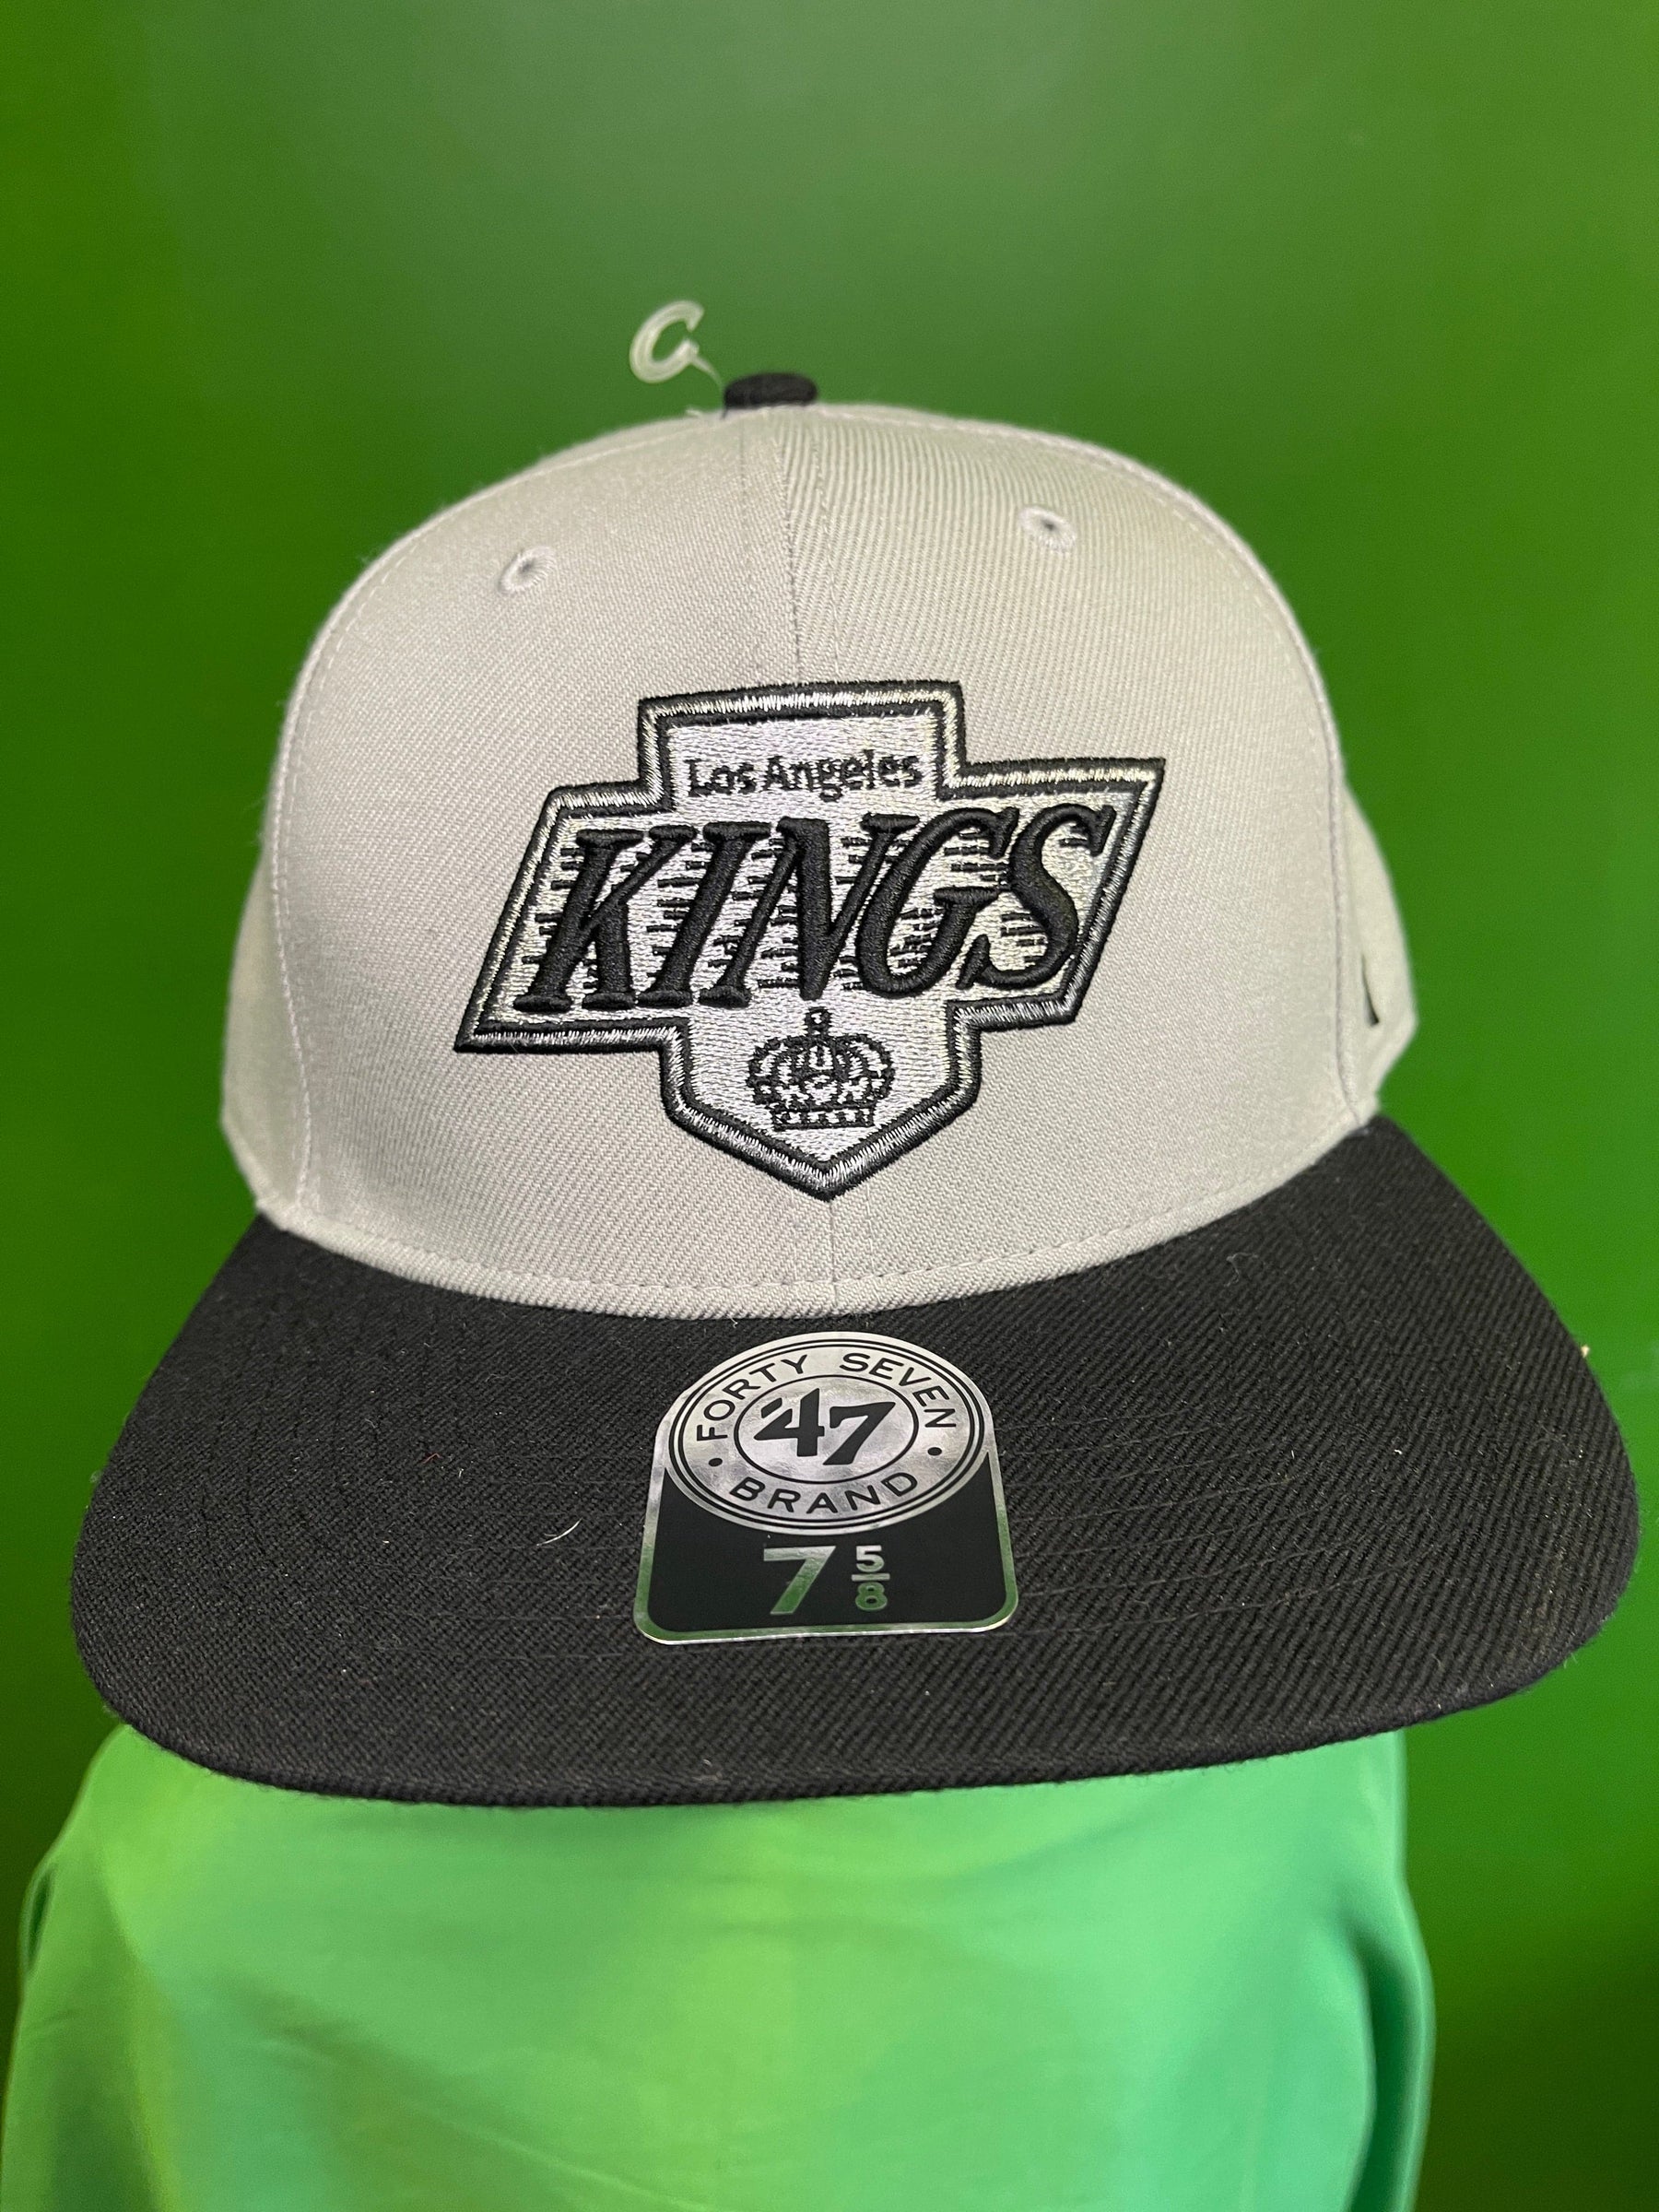 VINTAGE LA Kings Mitchell & Ness Fitted Hat Size 7 3/4 NHL